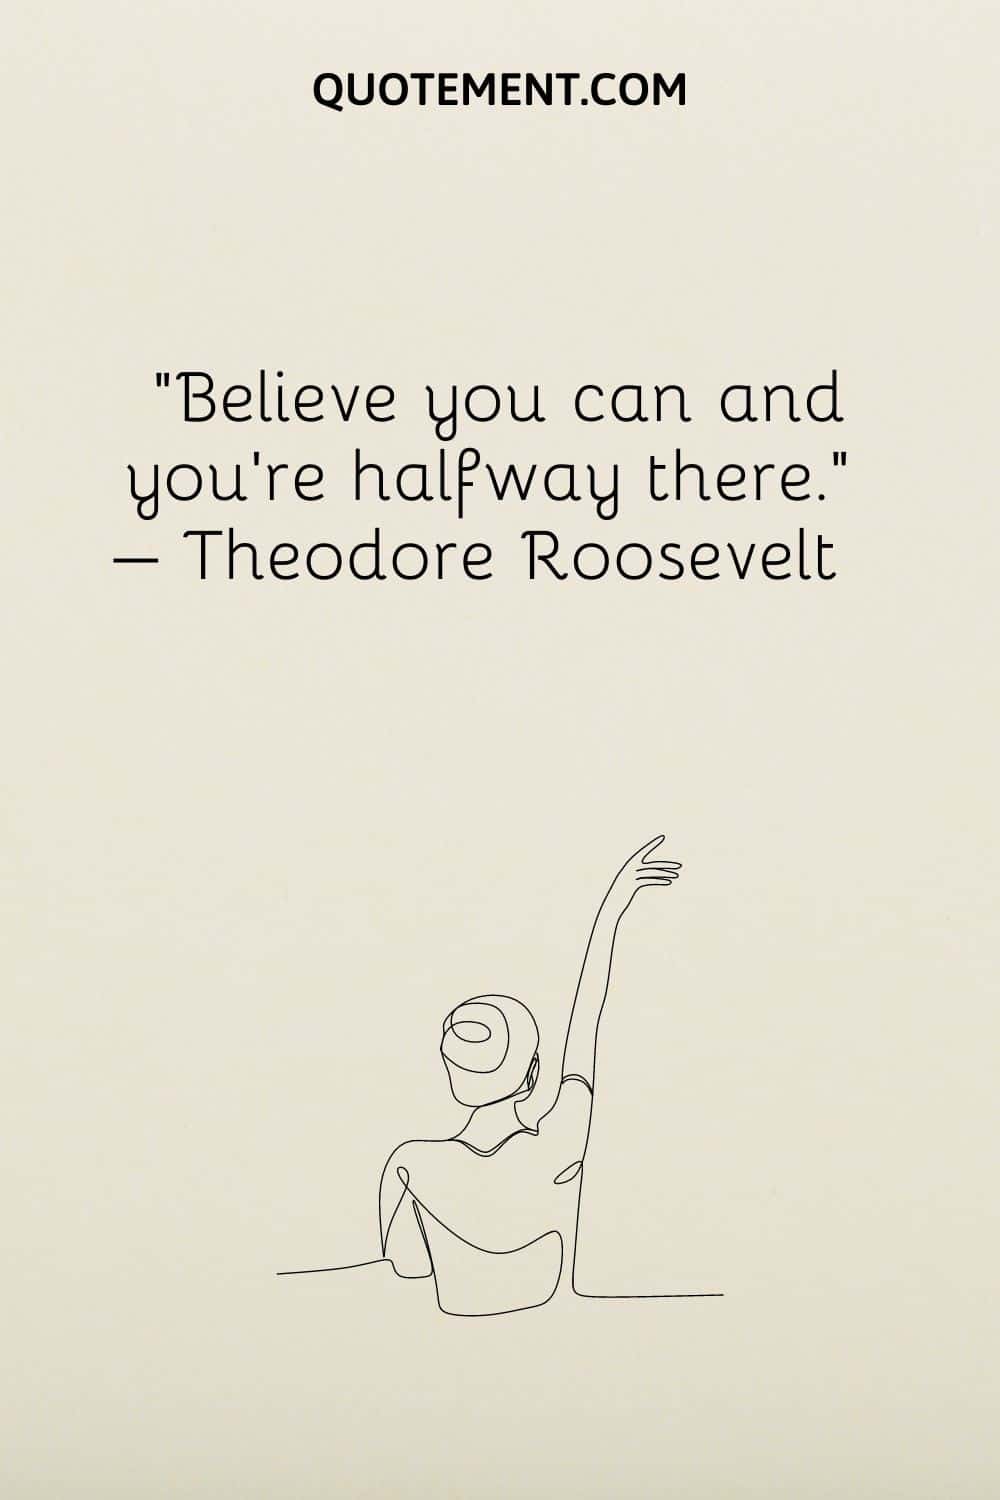 Believe you can and you’re halfway there